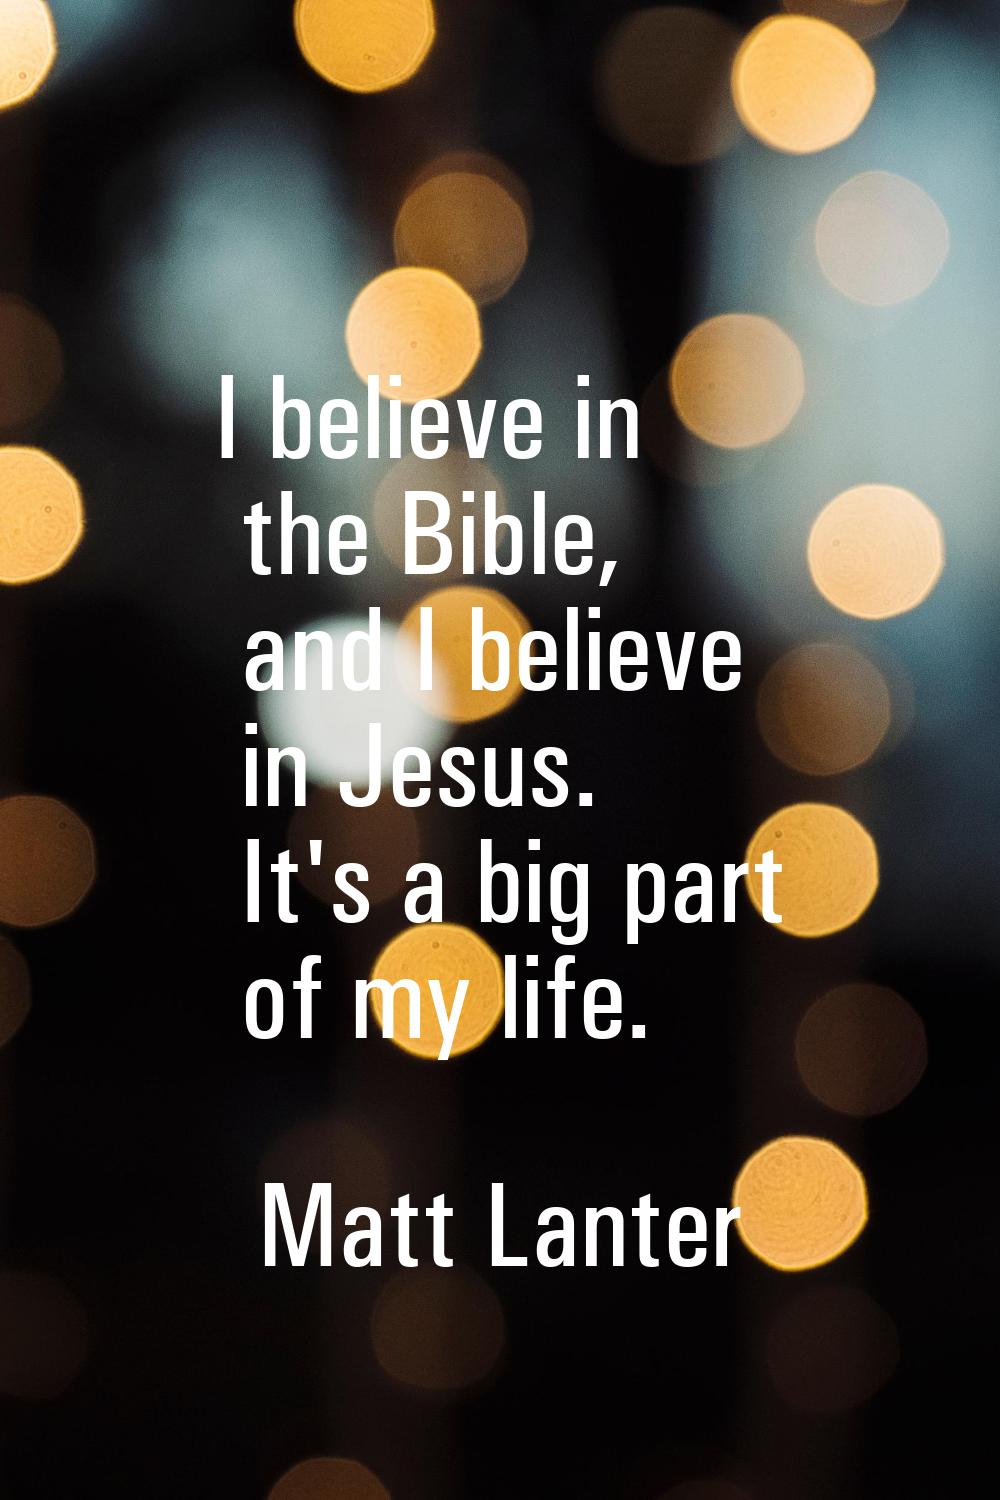 I believe in the Bible, and I believe in Jesus. It's a big part of my life.